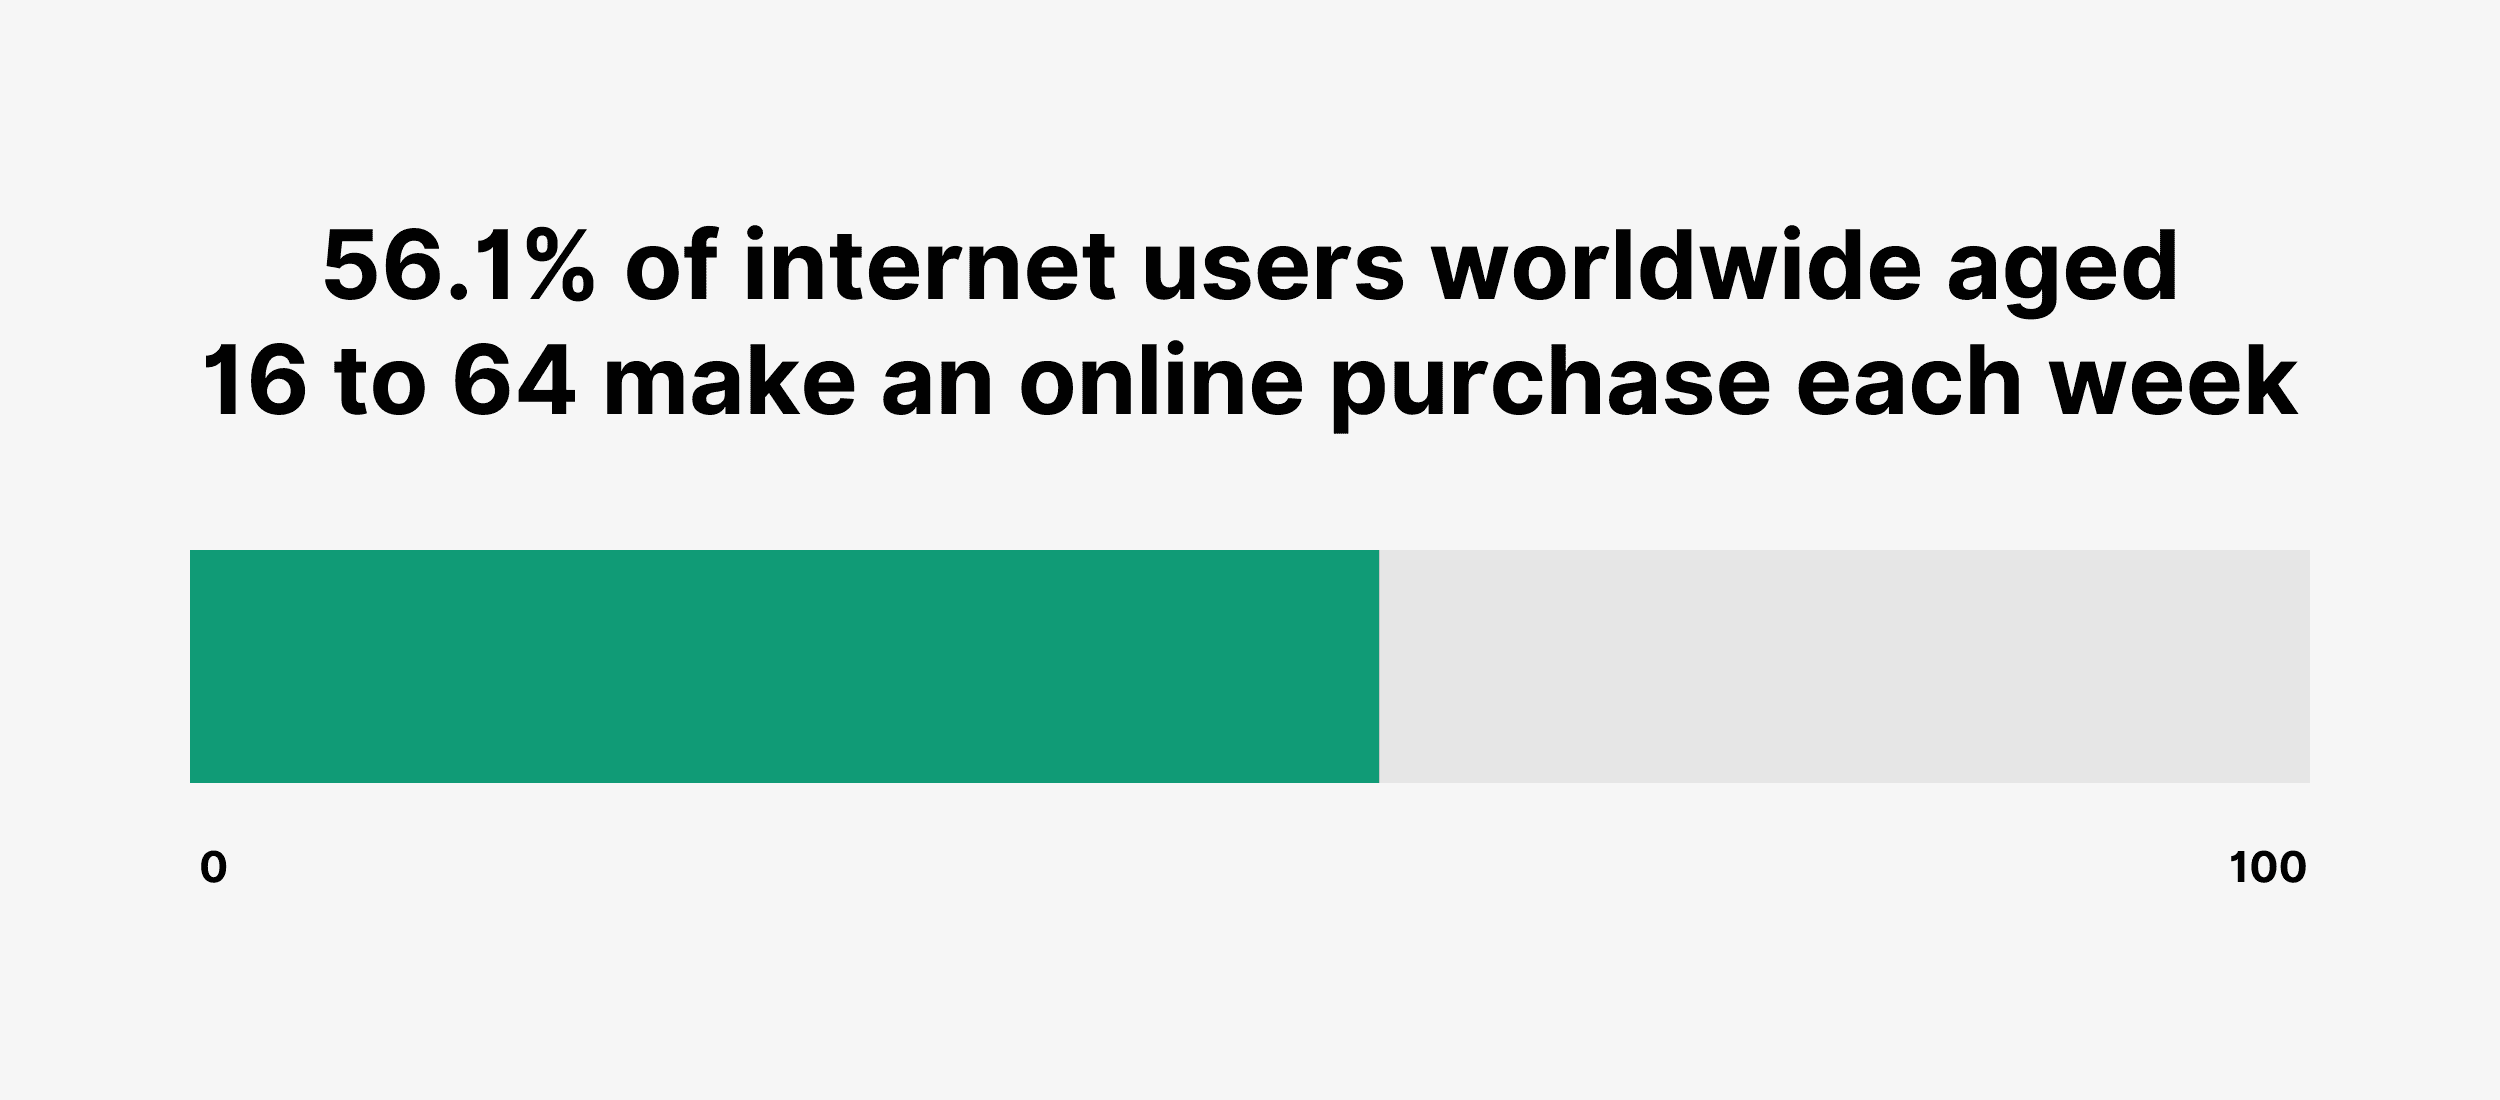 56.1% of internet users worldwide aged 16 to 64 make an online purchase each week